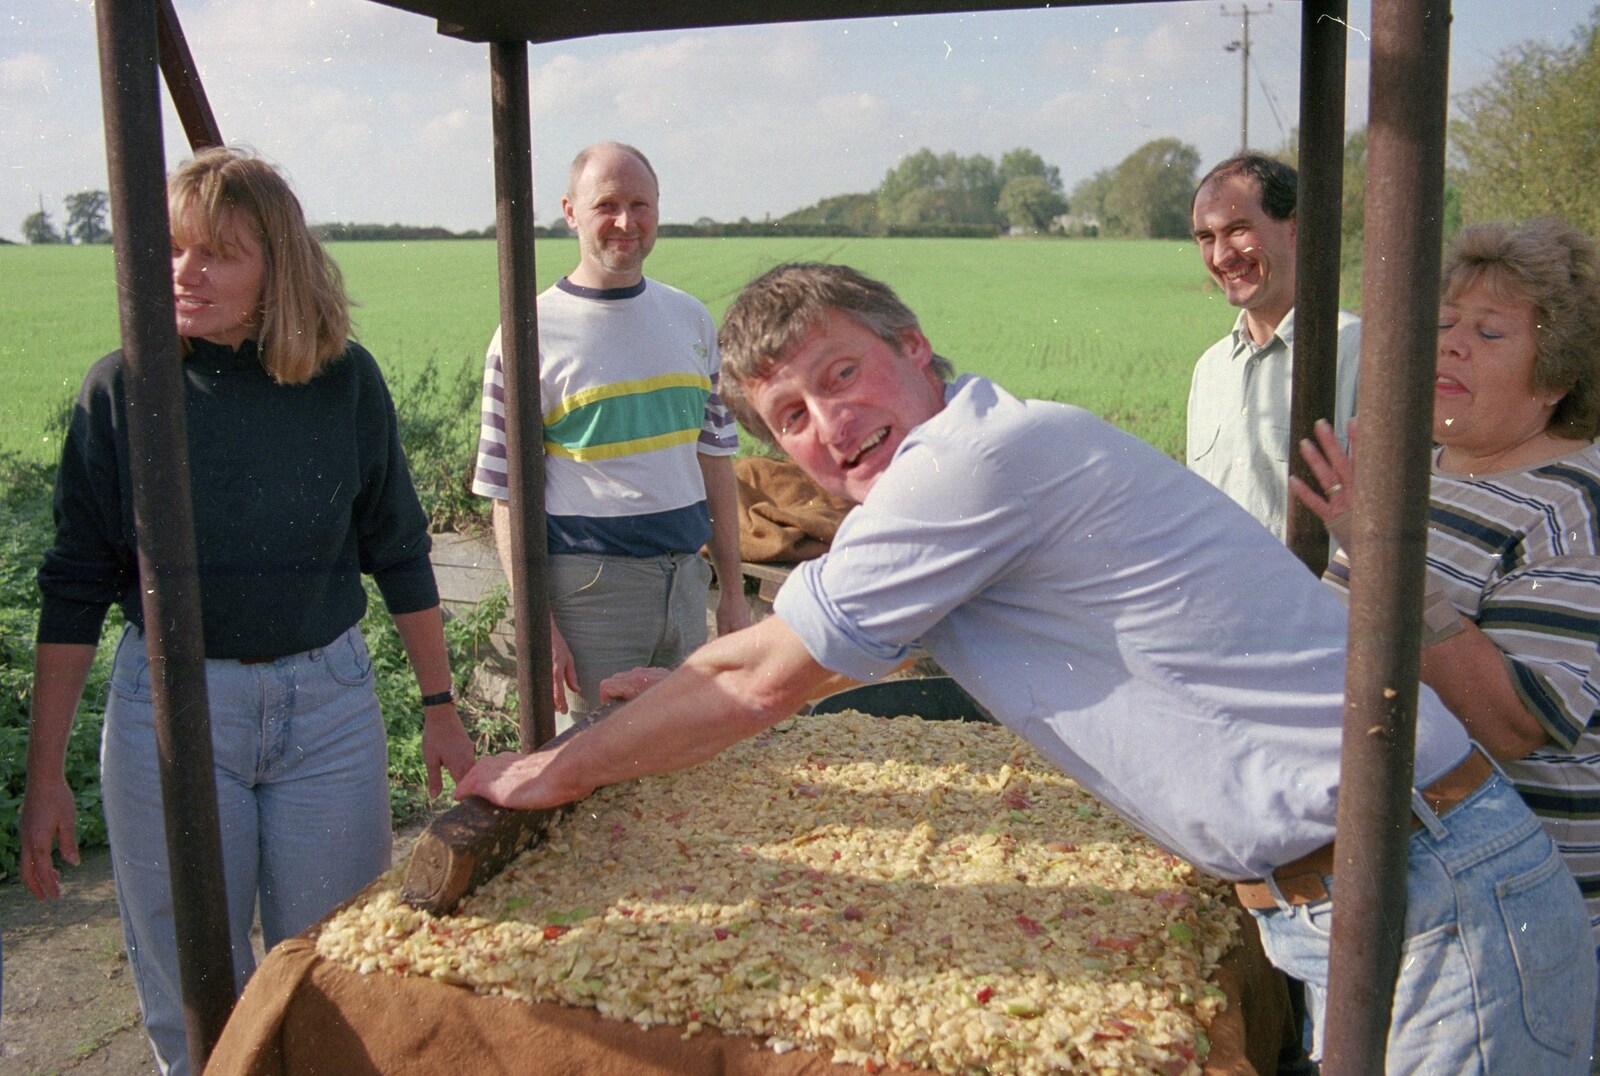 Geoff tamps down chopped apples from Cider Making With Geoff and Brenda, Stuston, Suffolk - 10th September 1998